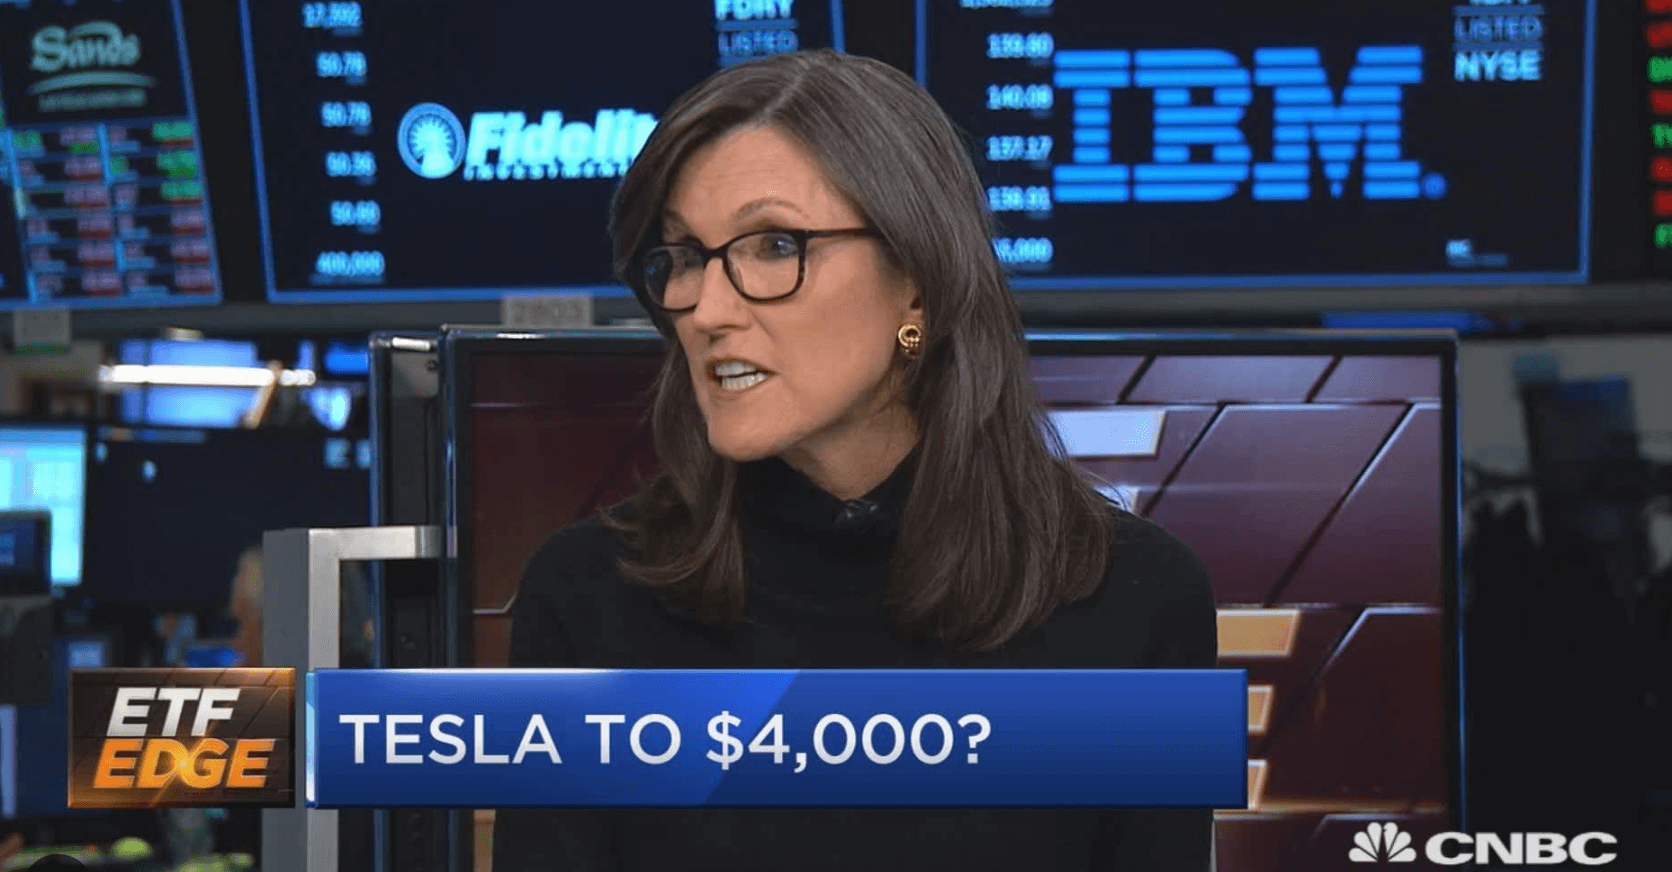 Cathie Woods $4,000 price target for Tesla